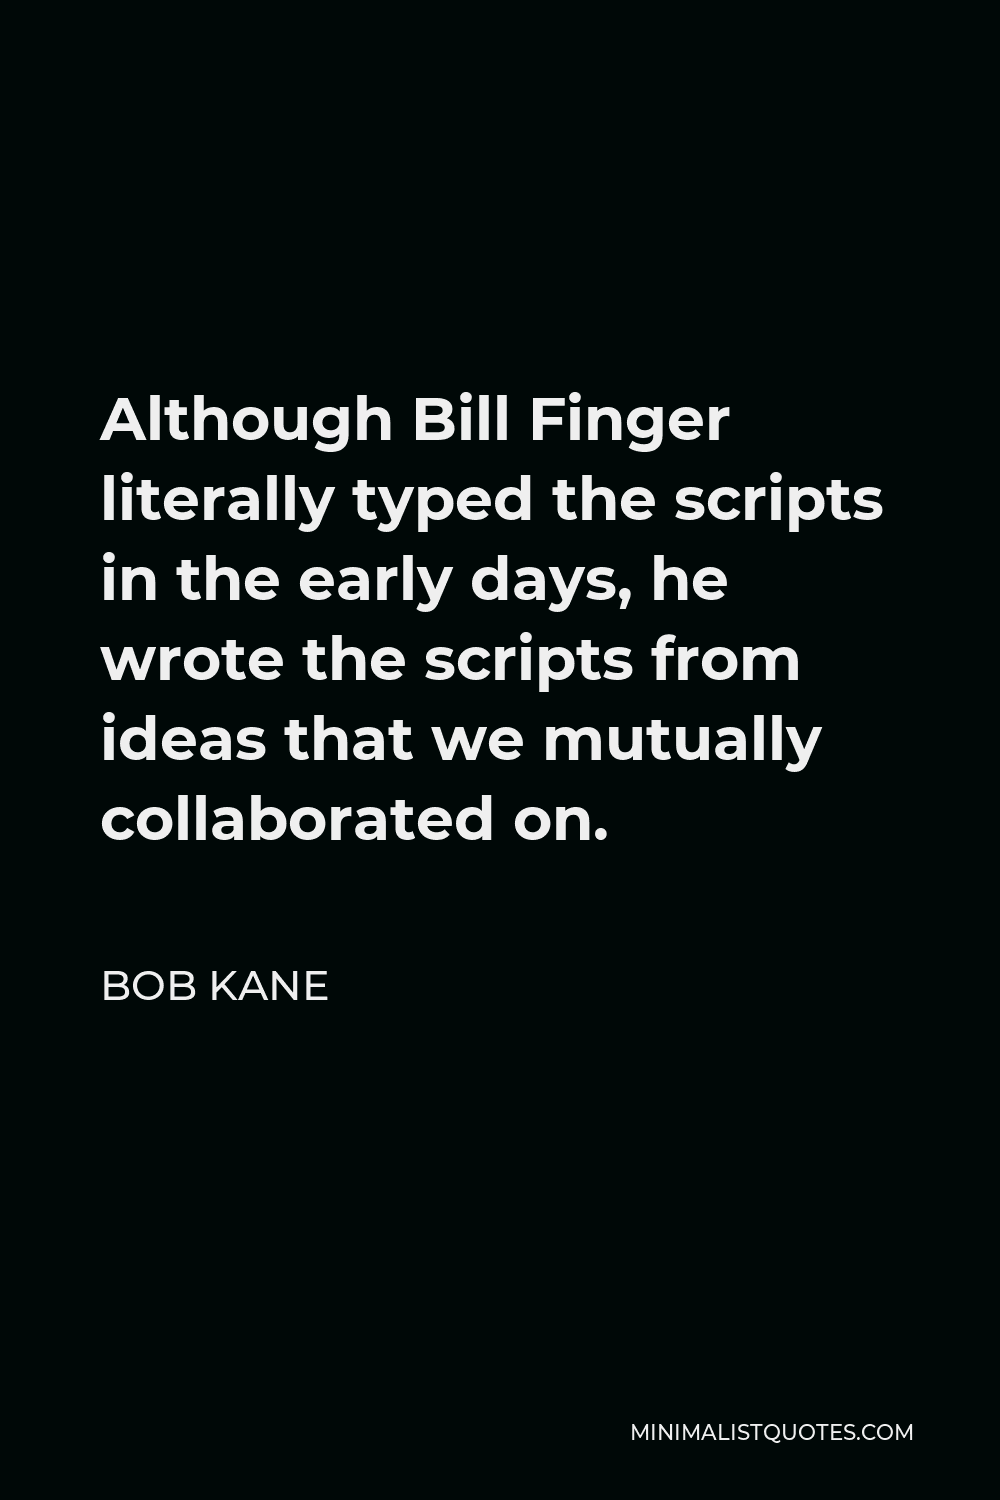 Bob Kane Quote - Although Bill Finger literally typed the scripts in the early days, he wrote the scripts from ideas that we mutually collaborated on.